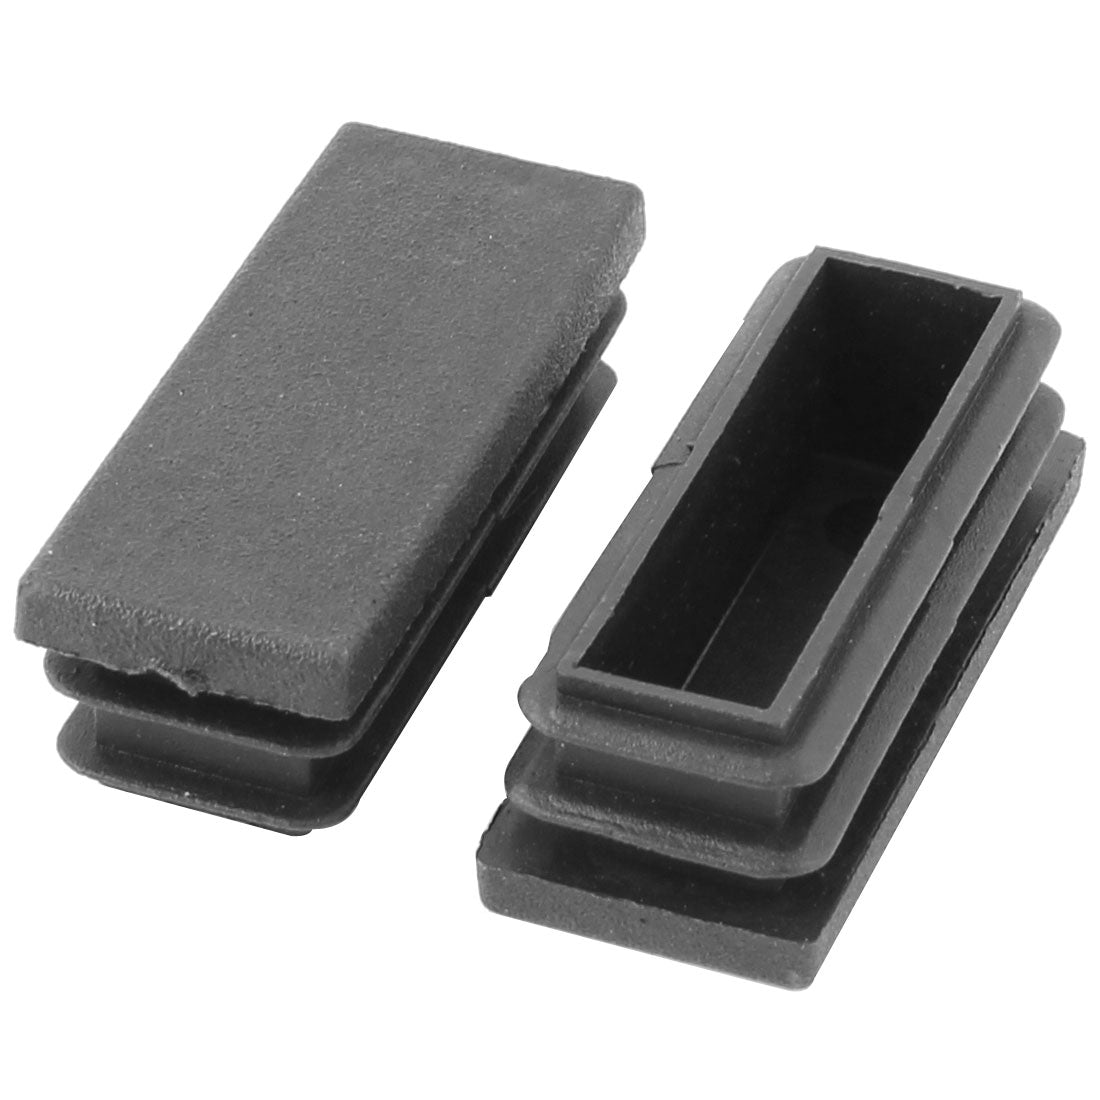 uxcell Uxcell Home Plastic Rectangle Floor Protecting Furniture Table Leg Tube Inserts Black 50 x 20mm 20pcs